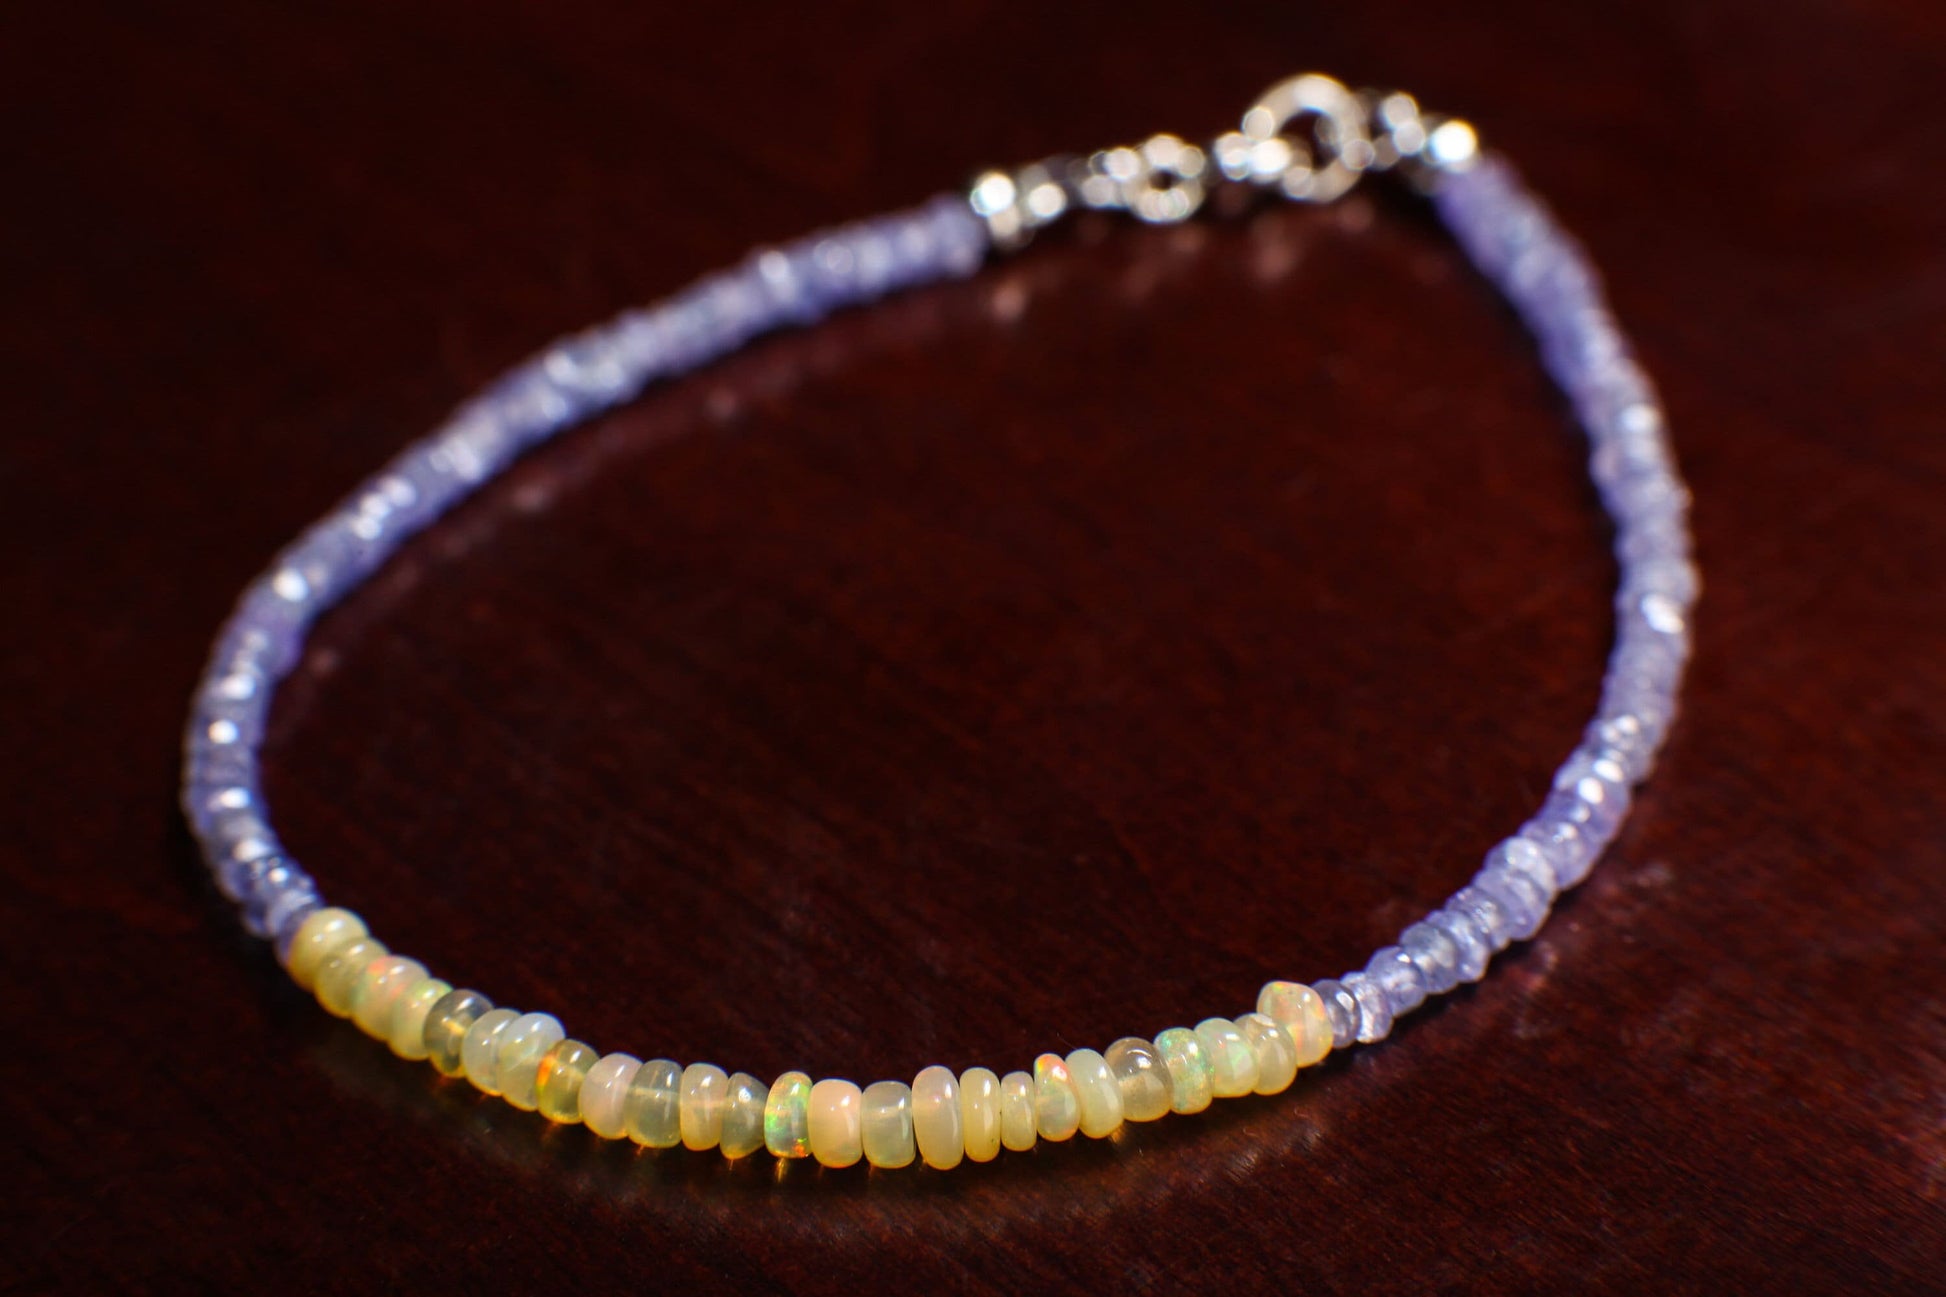 Tanzanite Faceted 3mm Rondelle with Ethiopian Opal Gemstone Bracelet in 925 Sterling Silver Chain and Clasp, Gift for her